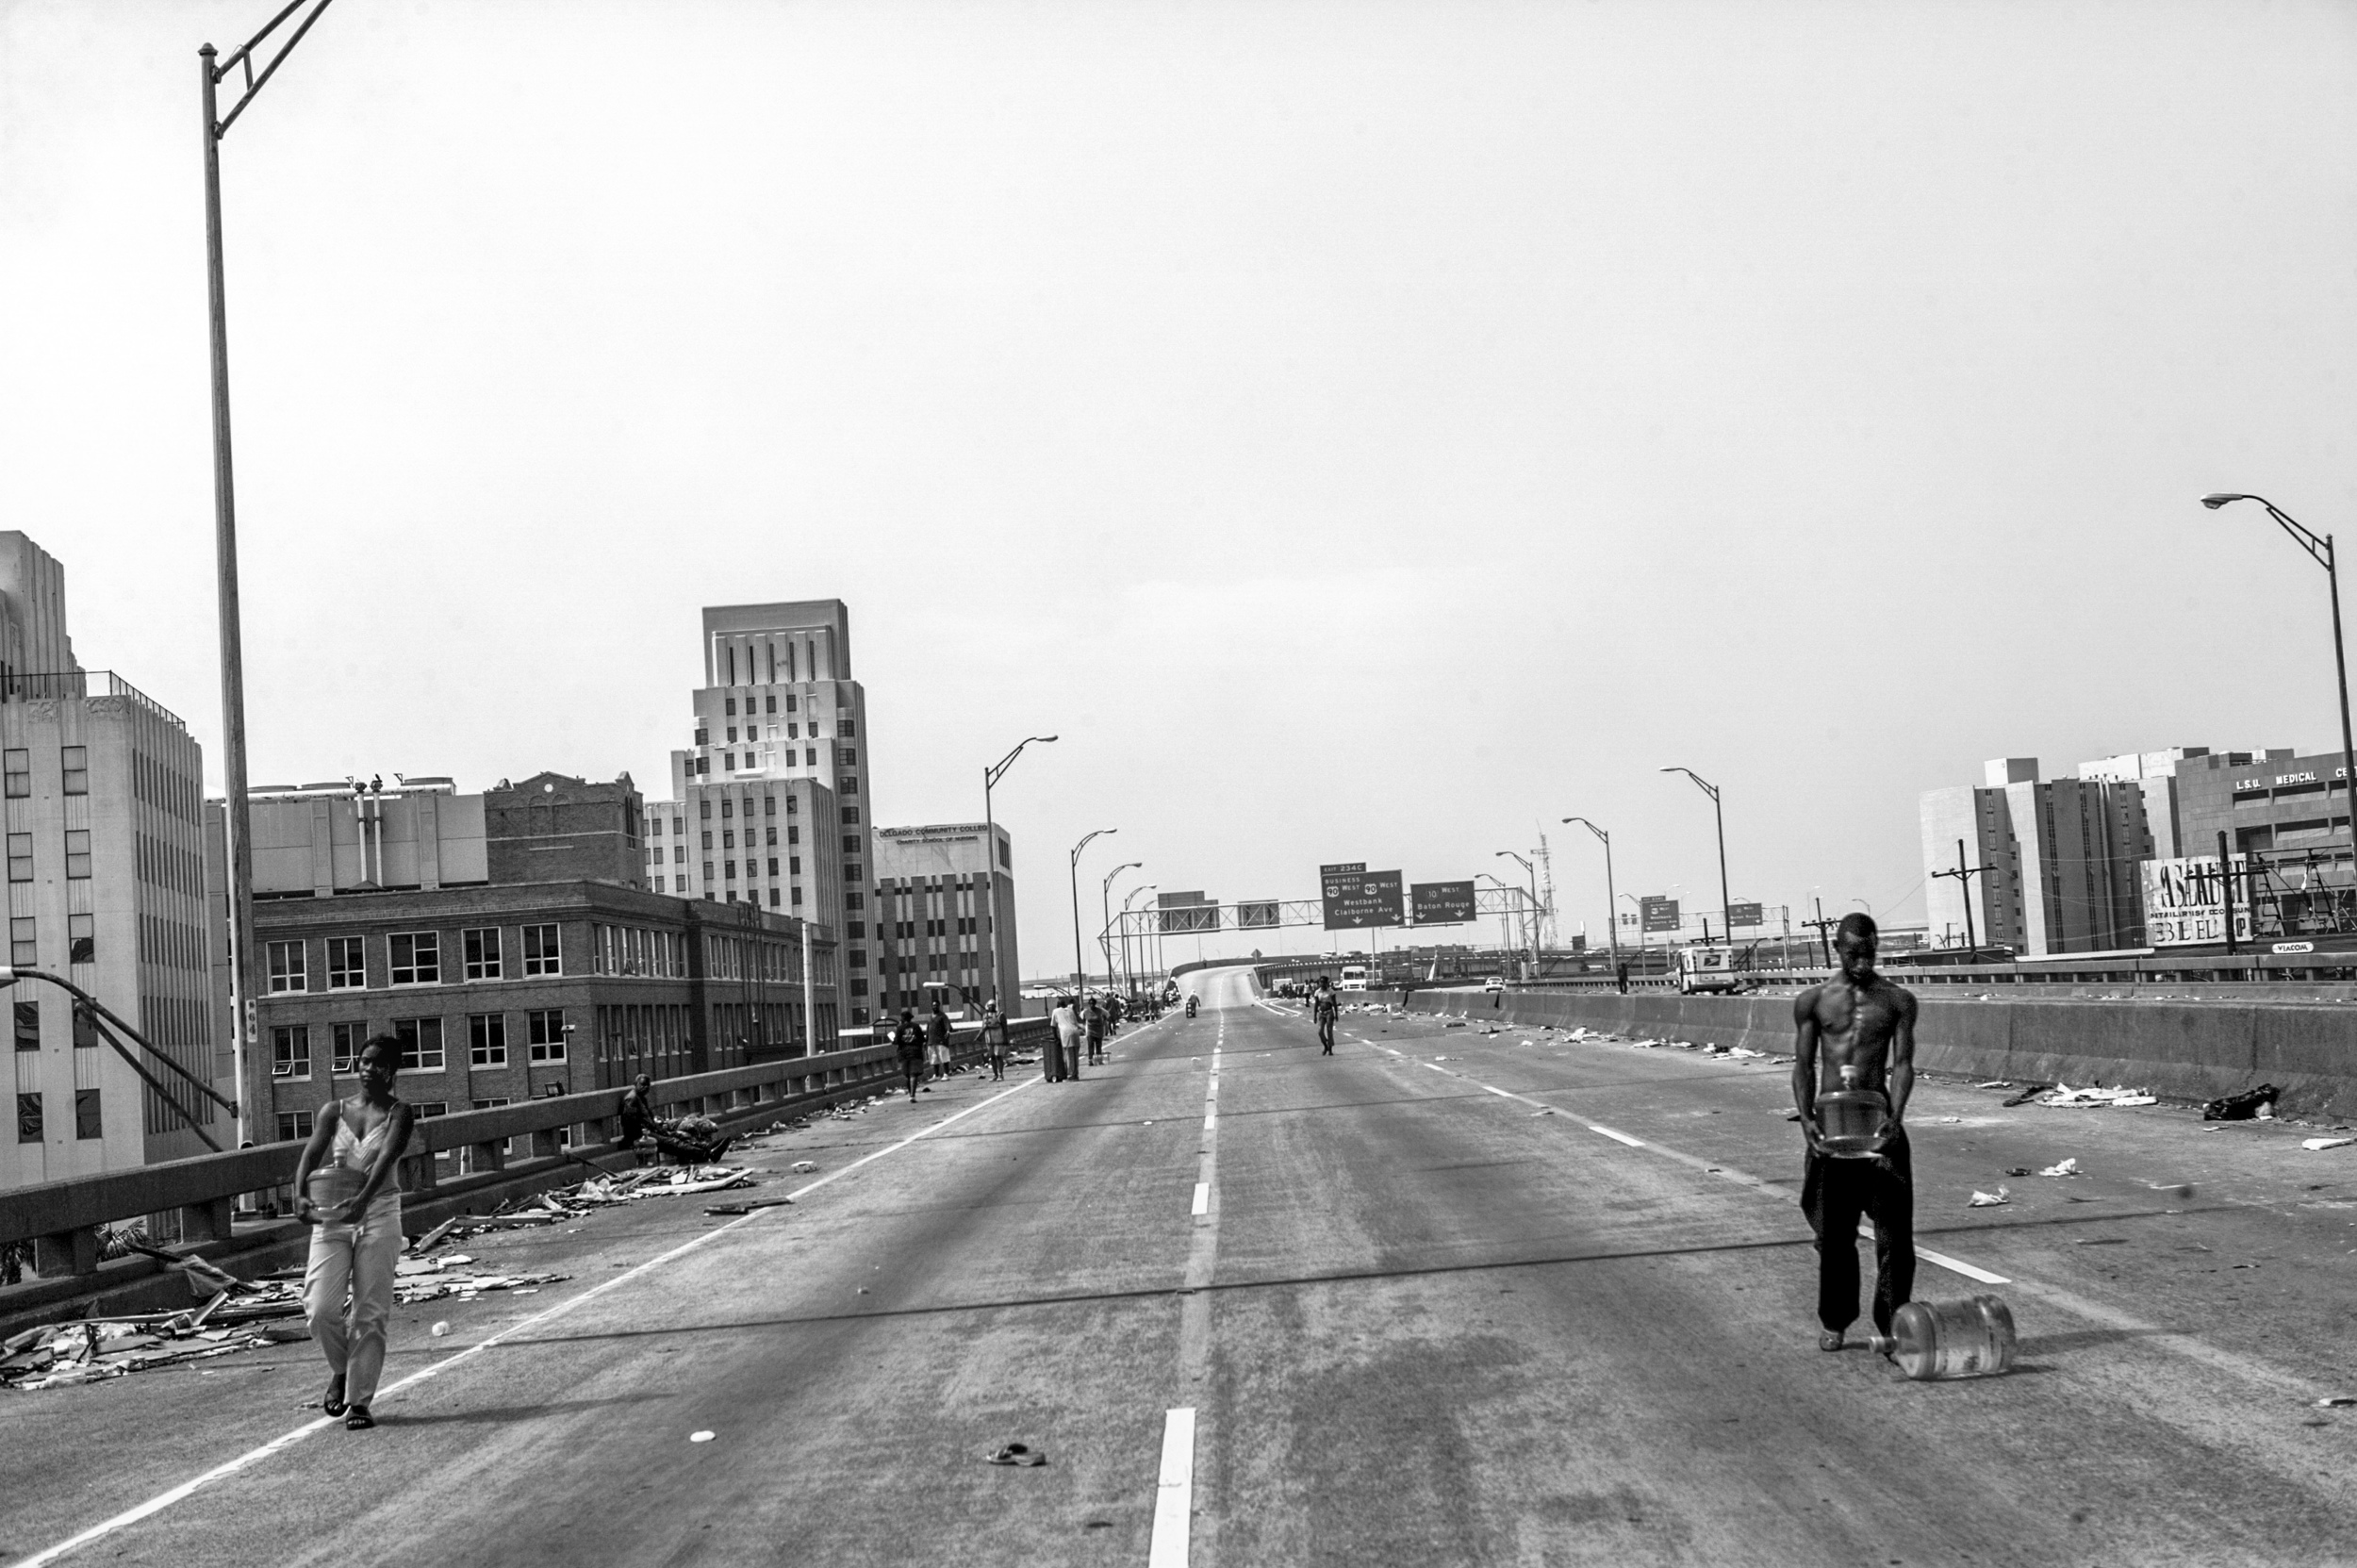  For up to four days almost 300 New Orleans residents, mostly African Americans, were stranded on Interstate 10 until they were finally rescued by aid helicopters. During the four days on this asphalt camp they ran out of water, food and medicine. Pe